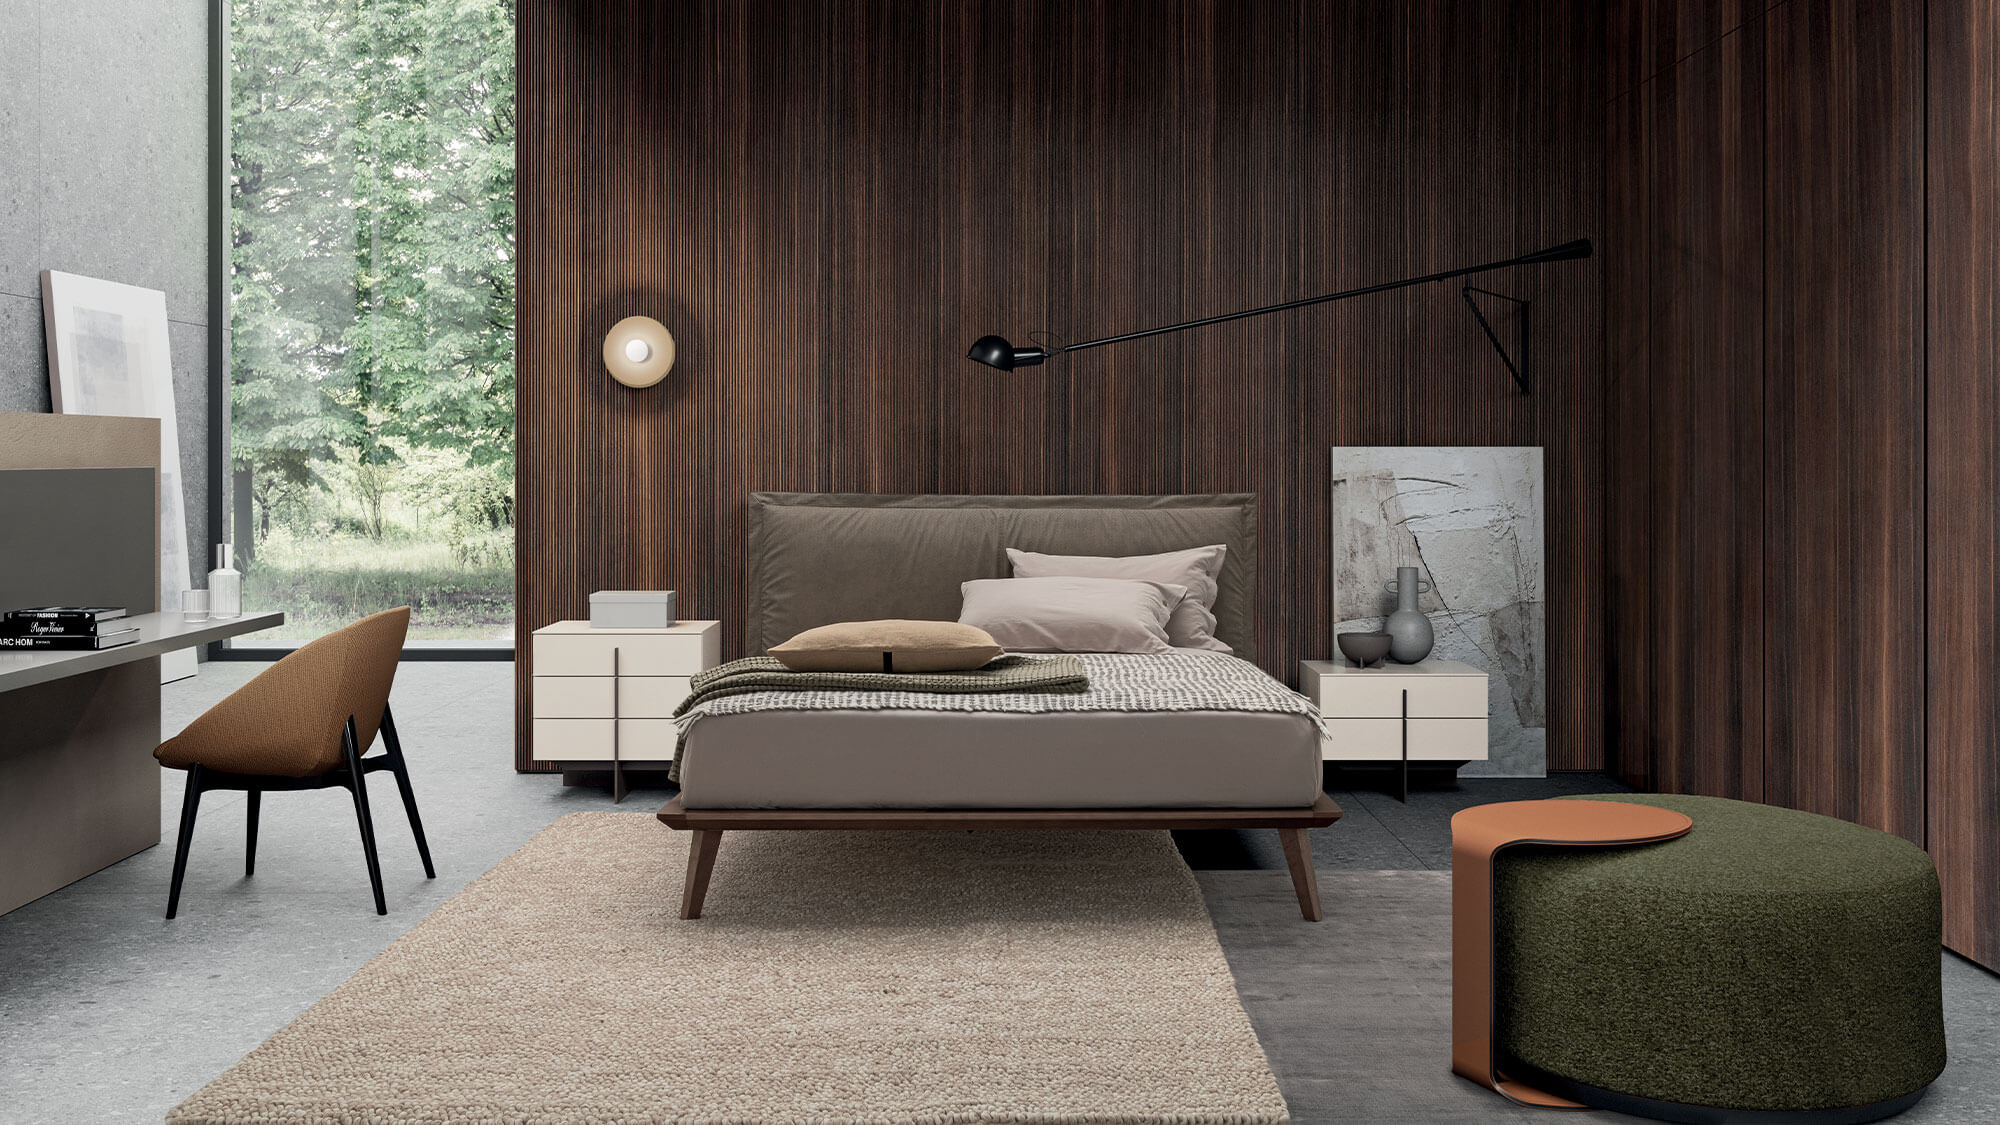 Bedroom with Morgan bed, Katana nightstands, Besu pouf and Le Mans armchair | Dallagnese